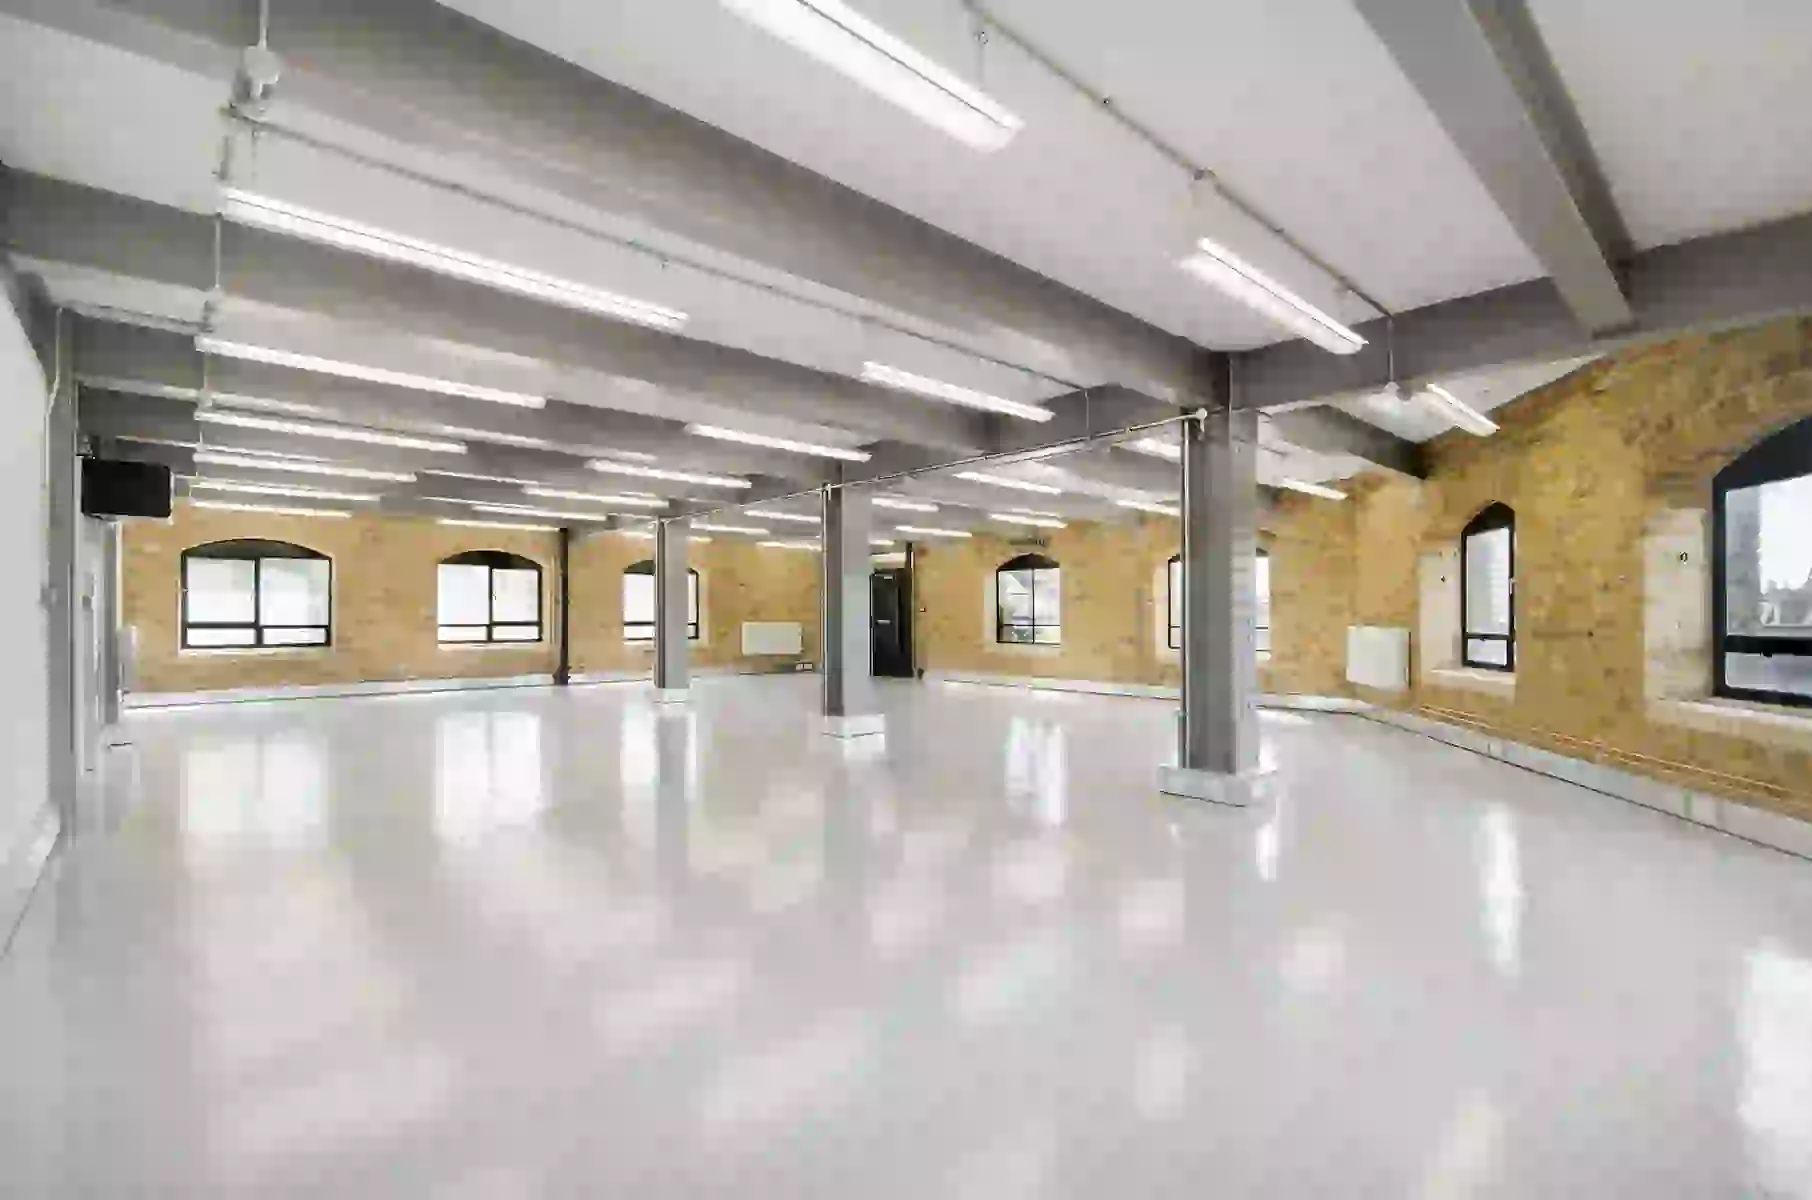 Office space to rent at The Biscuit Factory, Drummond Road, London, unit TB.A215, 1485 sq ft (137 sq m).